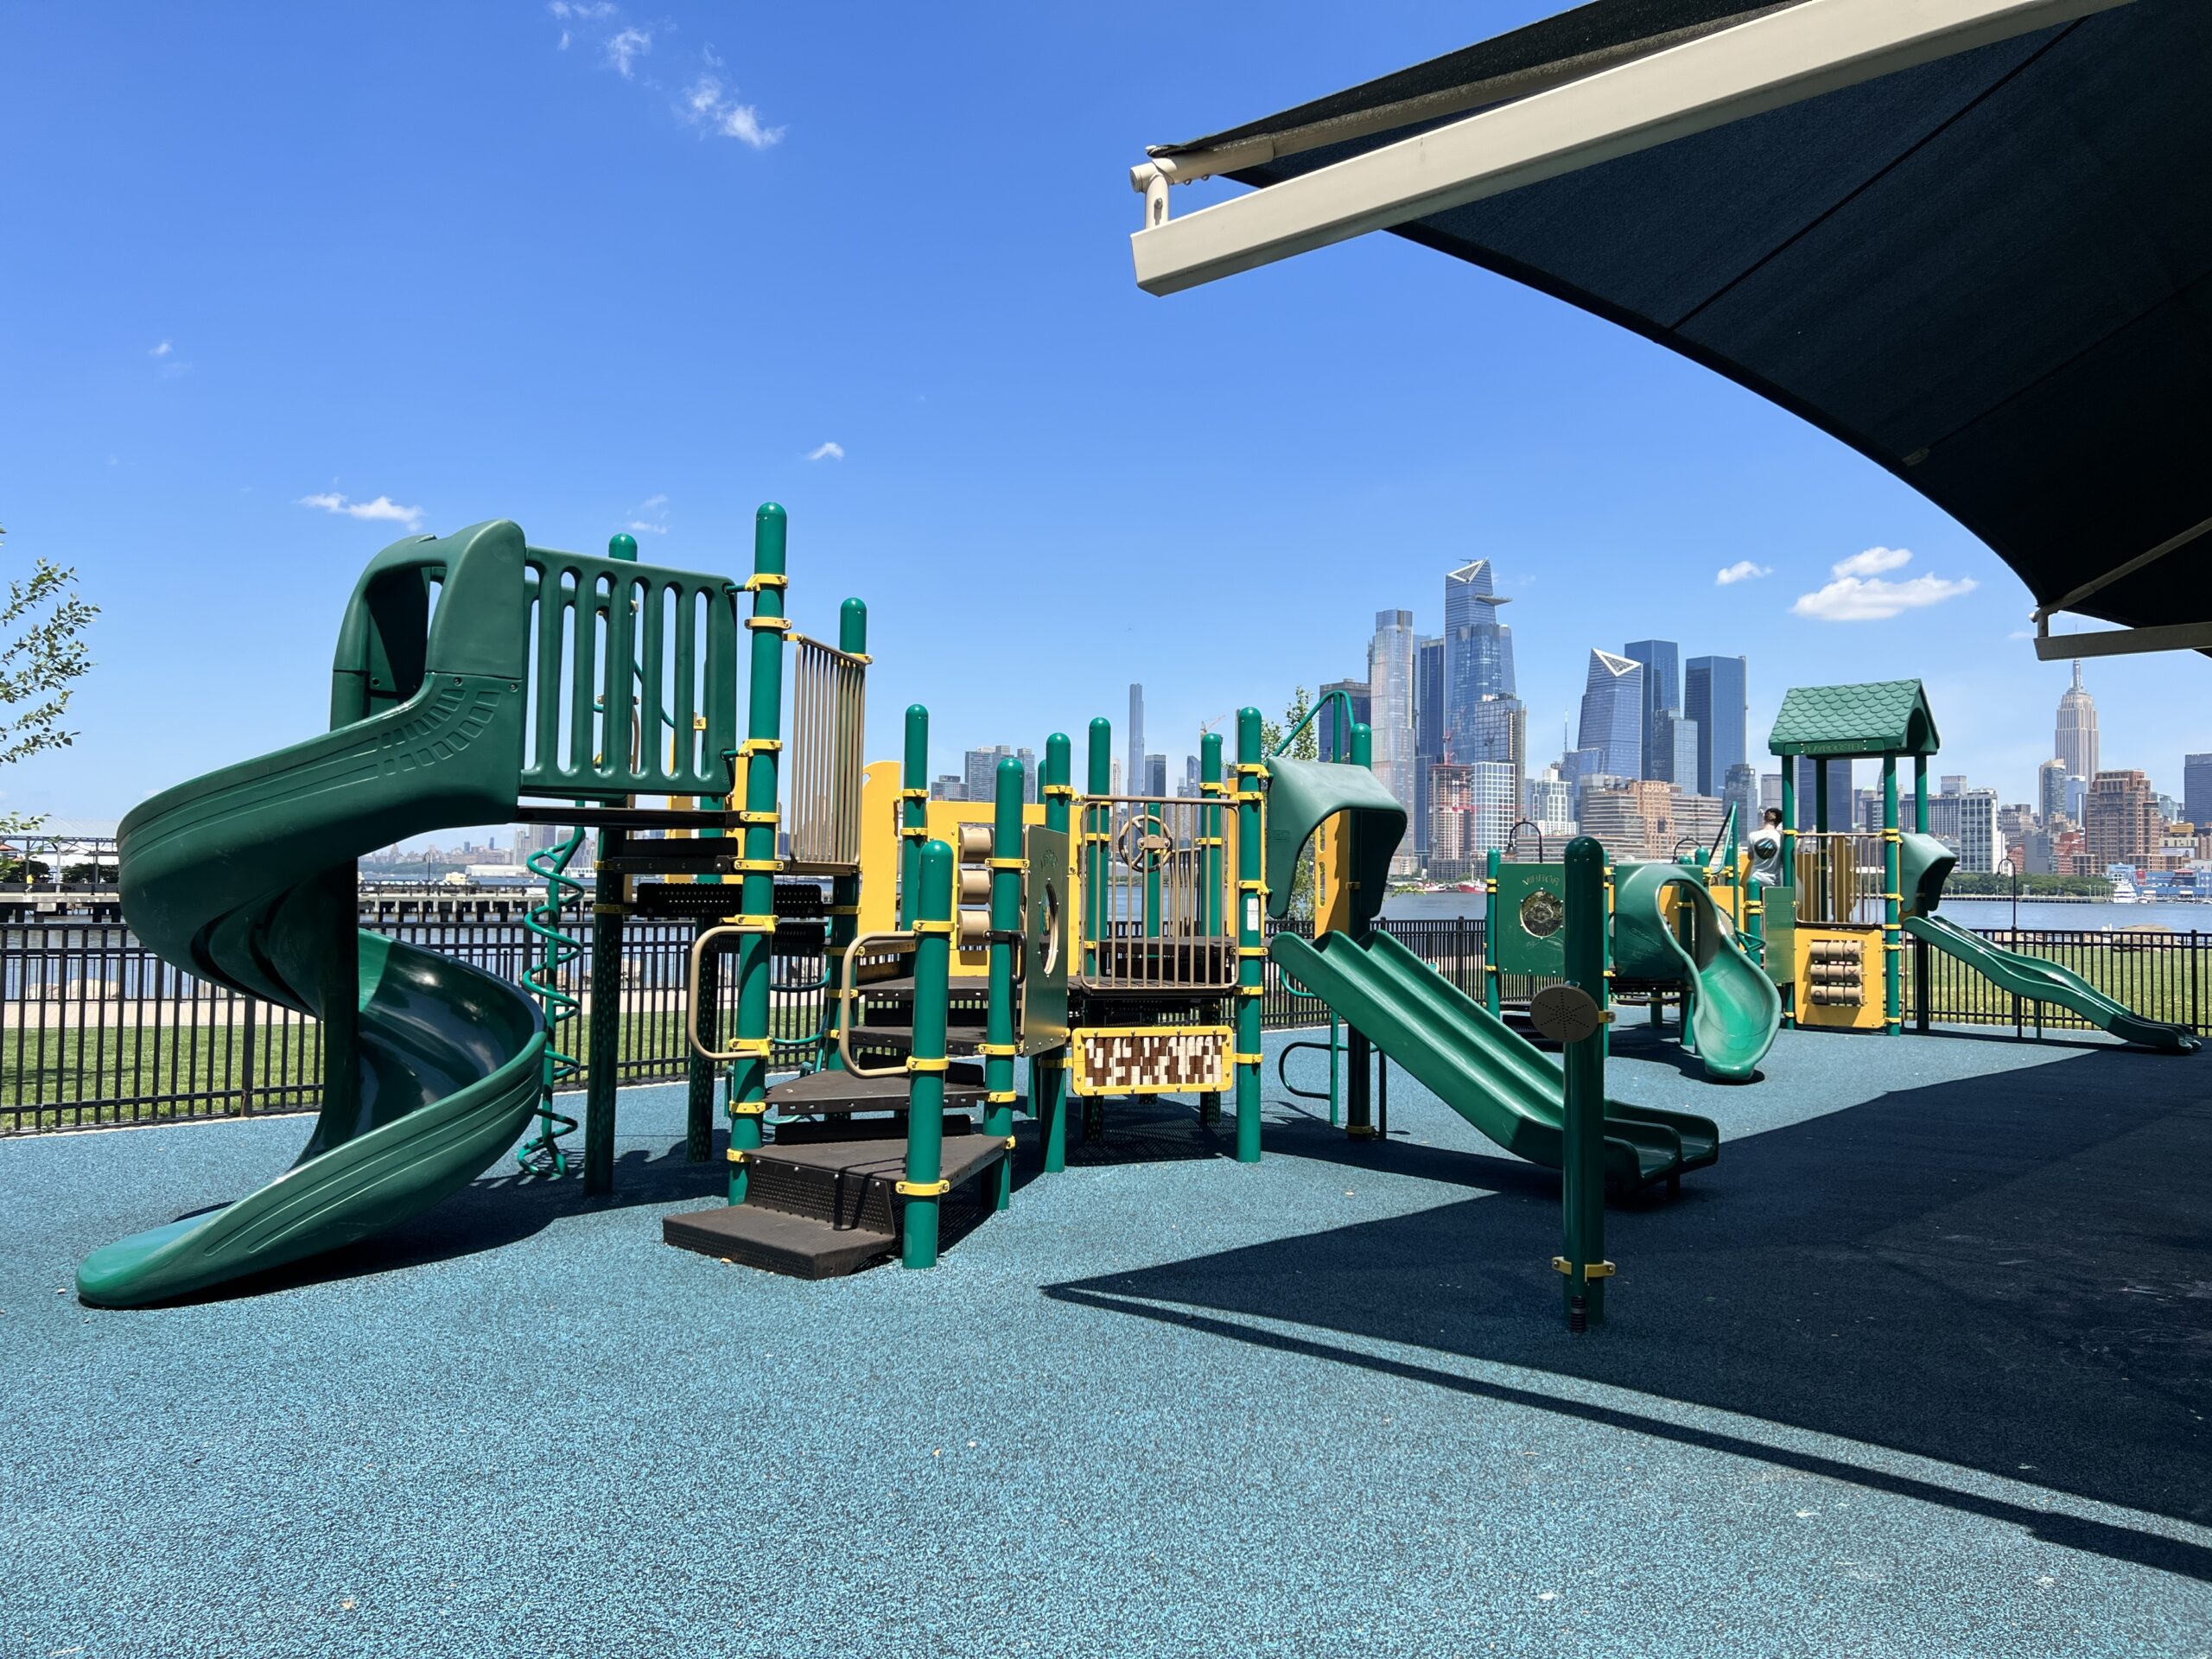 Maxwell Place Park Playground in Hoboken NJ - WIDE image - both playgrounds front side view